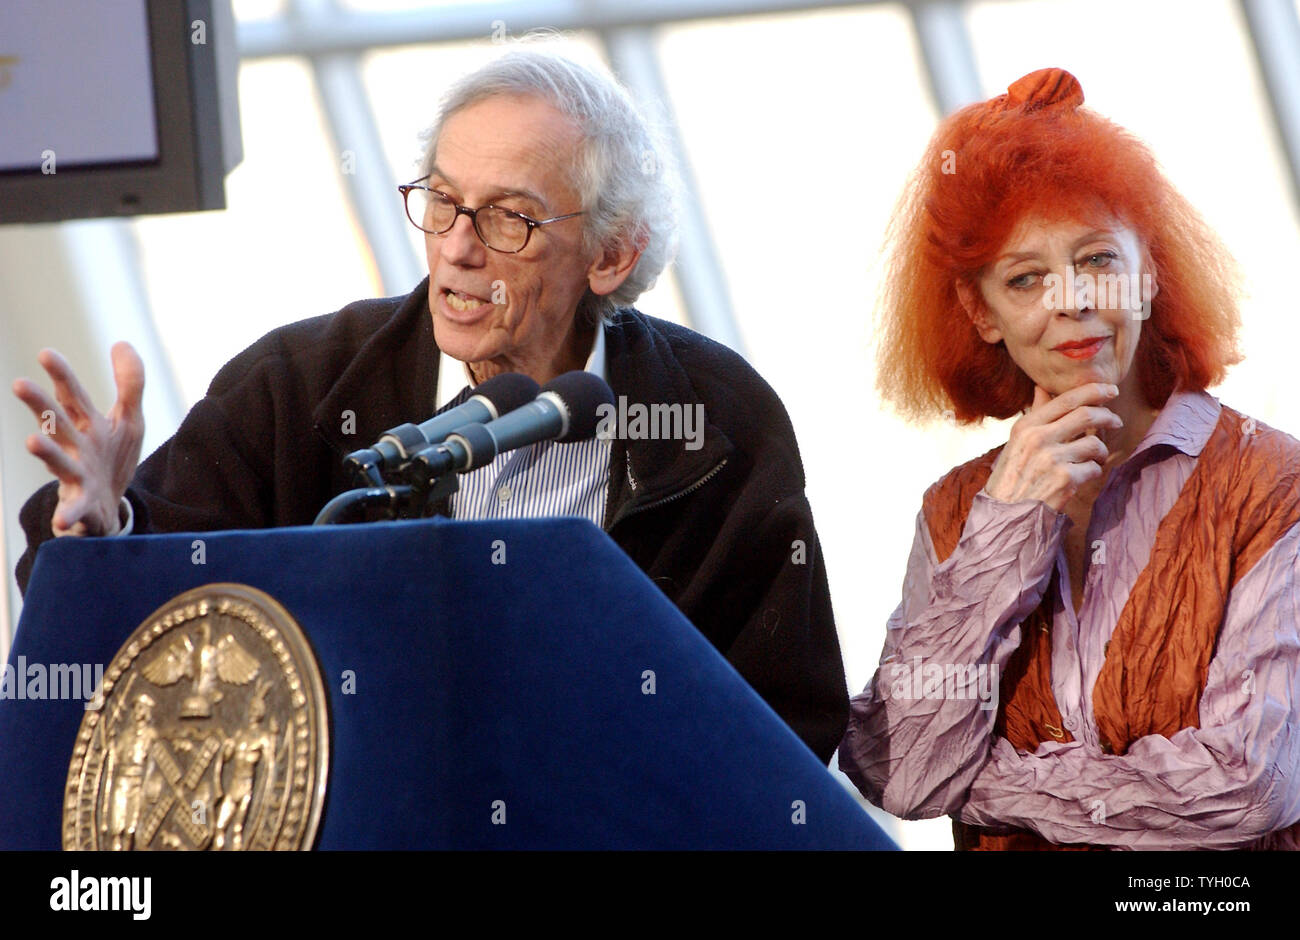 Artists Christo and Jeanne Claude meet with the New York media on 2/11/2005 to field questions and announce that the installation of 'The Gates, Central Park, New York City, 1979-2005 will be completed on 2/12/05 throughout 23 miles of Central Park and will be on display there from 2/12/05 to 2/27/05. (UPI Photo/Ezio Petersen) Stock Photo